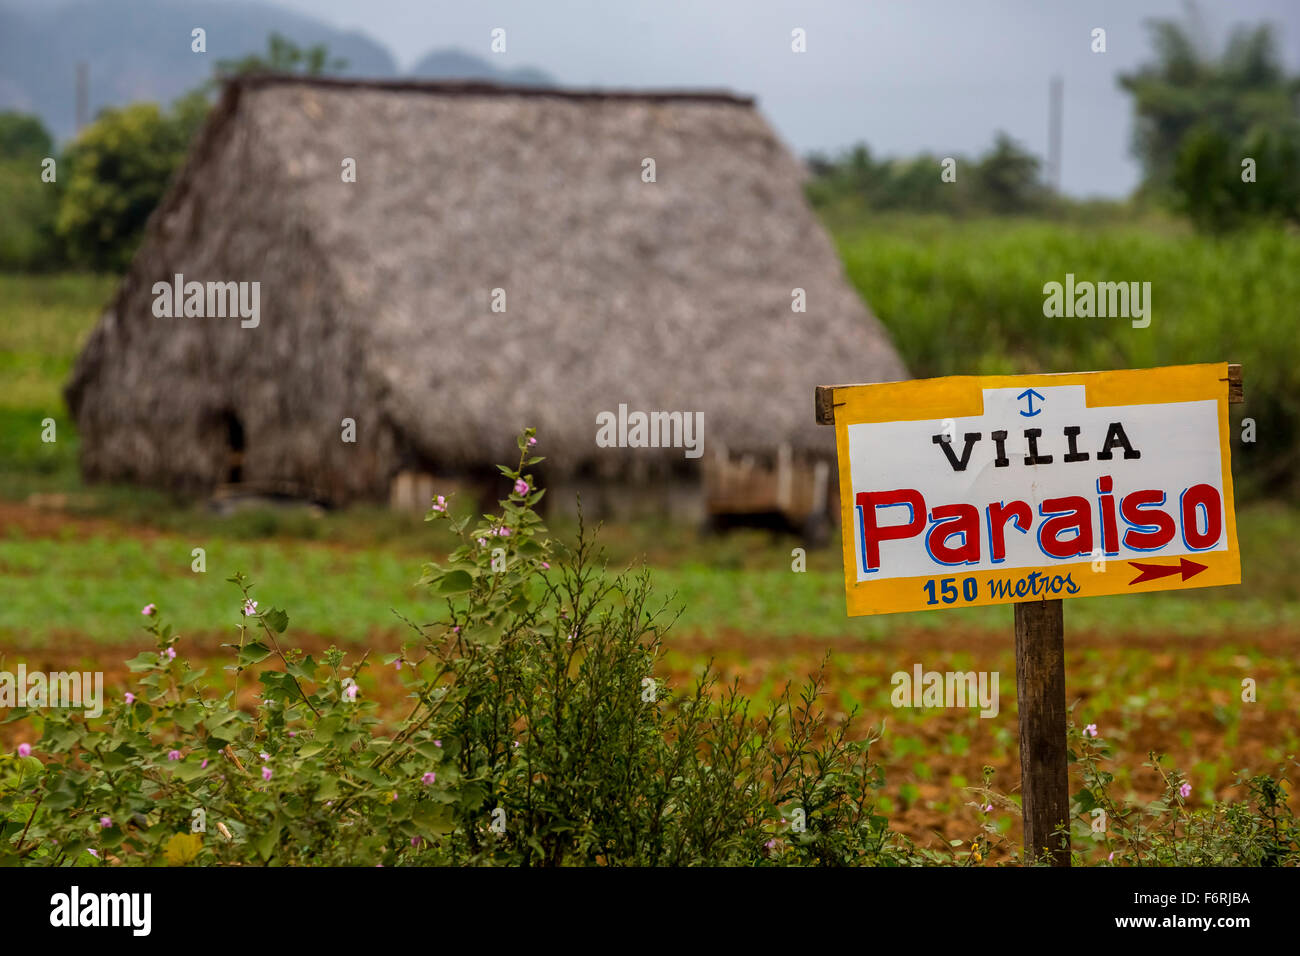 Sign to a private pension, Villa Paraiso, covered with leaves barn for drying tobacco leaves, Viñales, Cuba Stock Photo